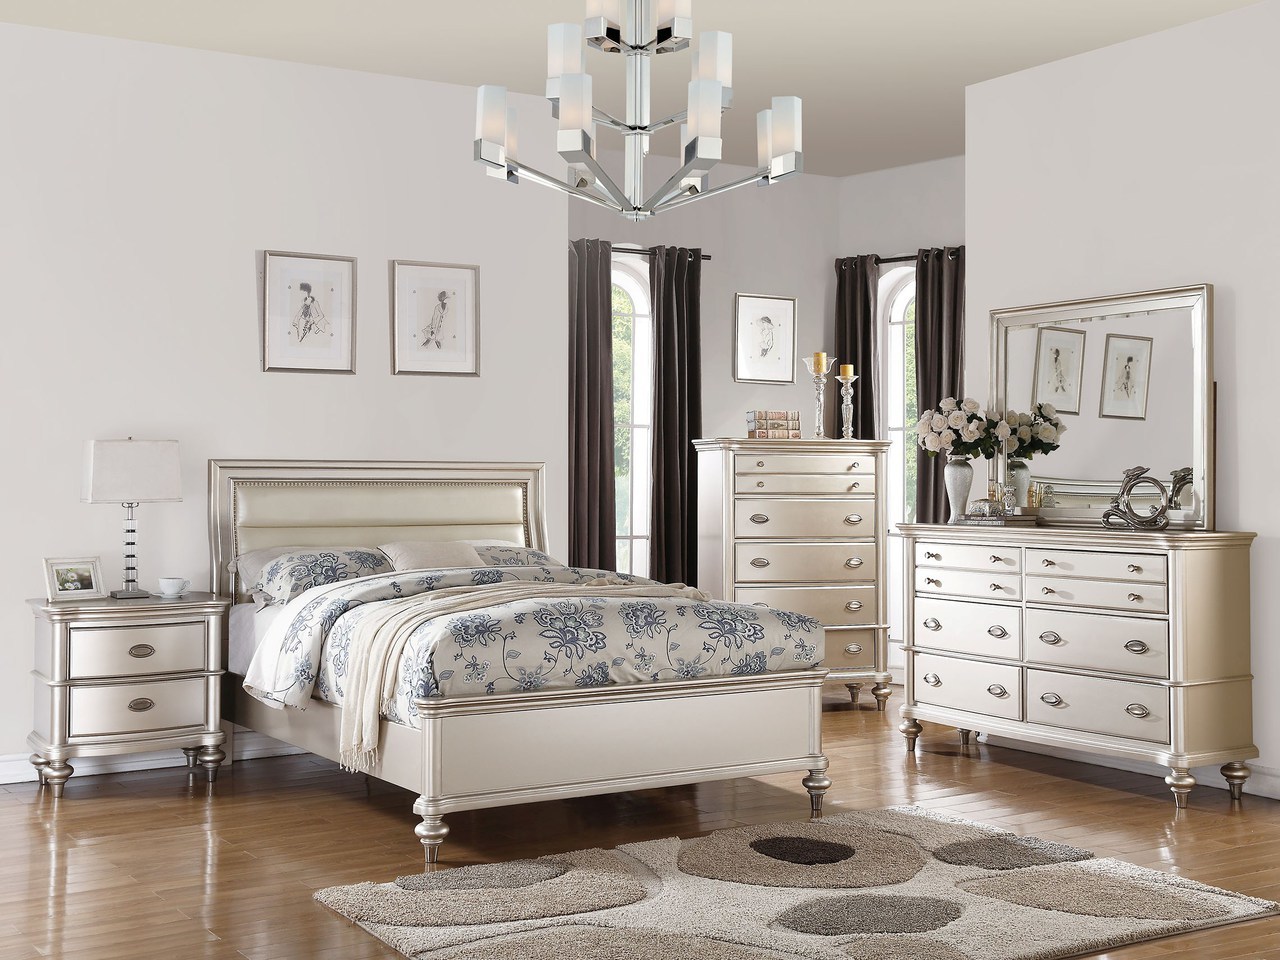 poundex bedroom furniture reviews